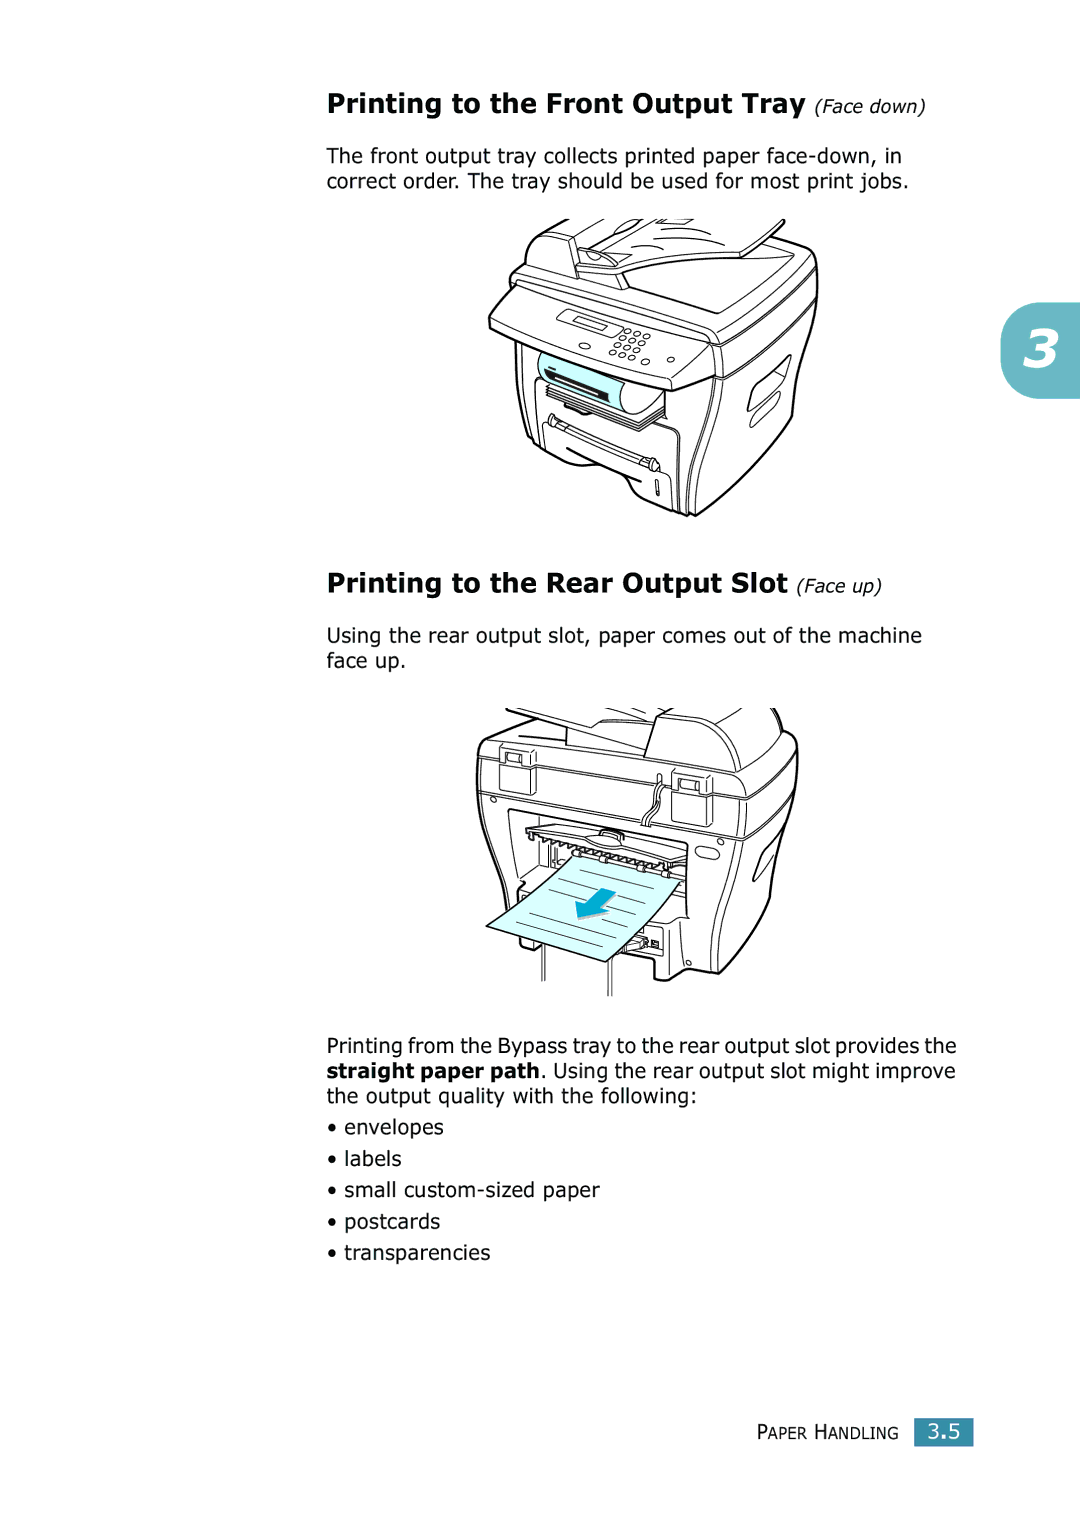 Xerox WorkCentre PE16 manual Printing to the Front Output Tray Face down, Printing to the Rear Output Slot Face up 